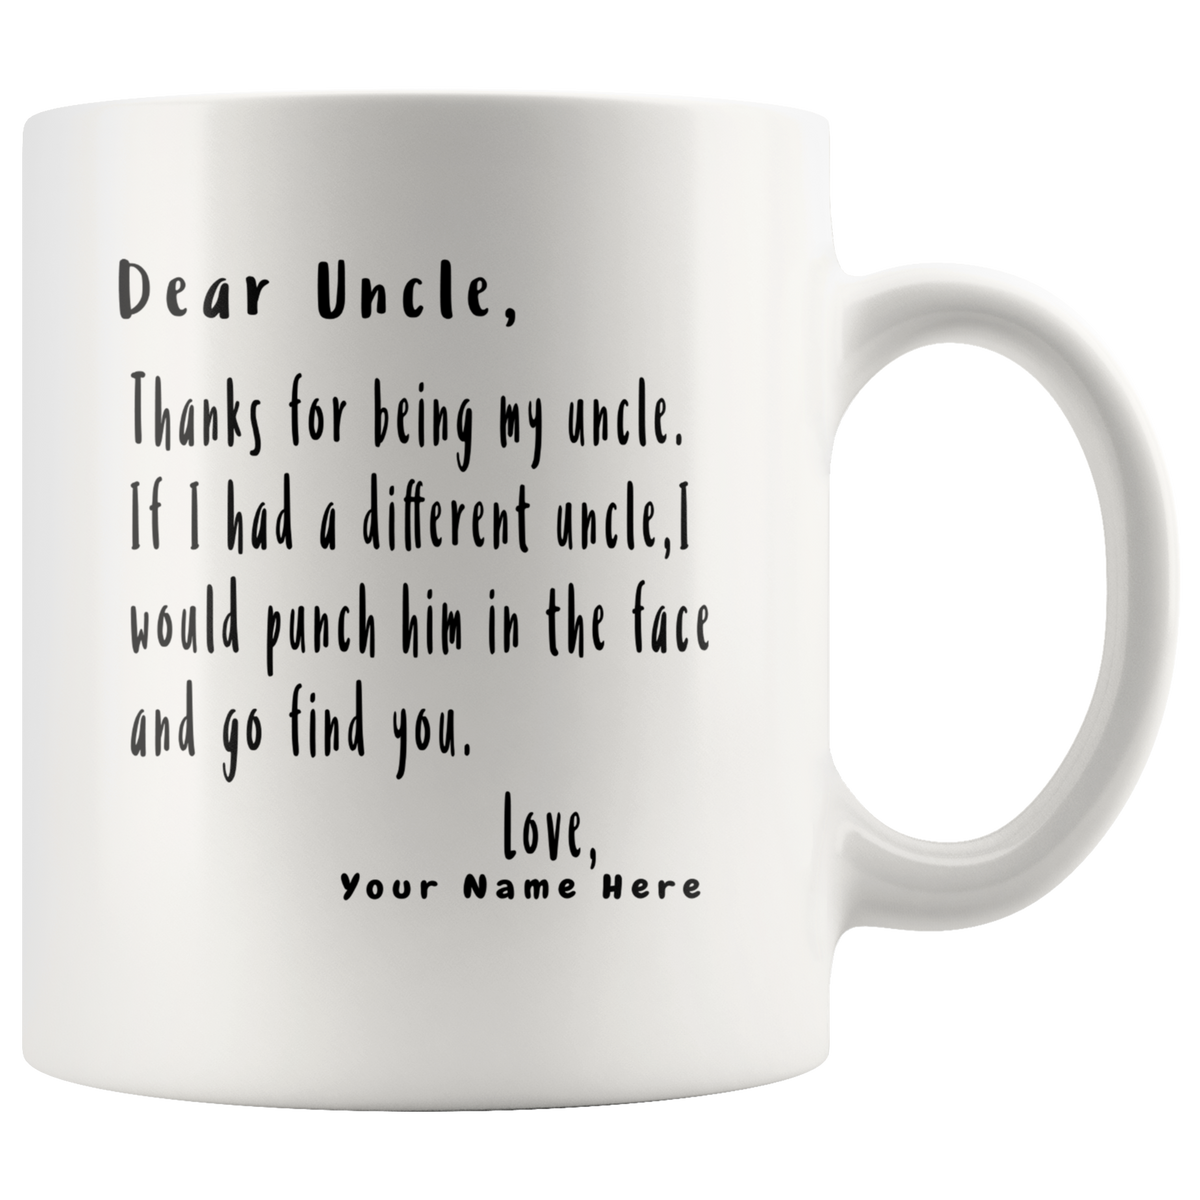 Personalized Uncle Mug - Thanks For Being My Uncle